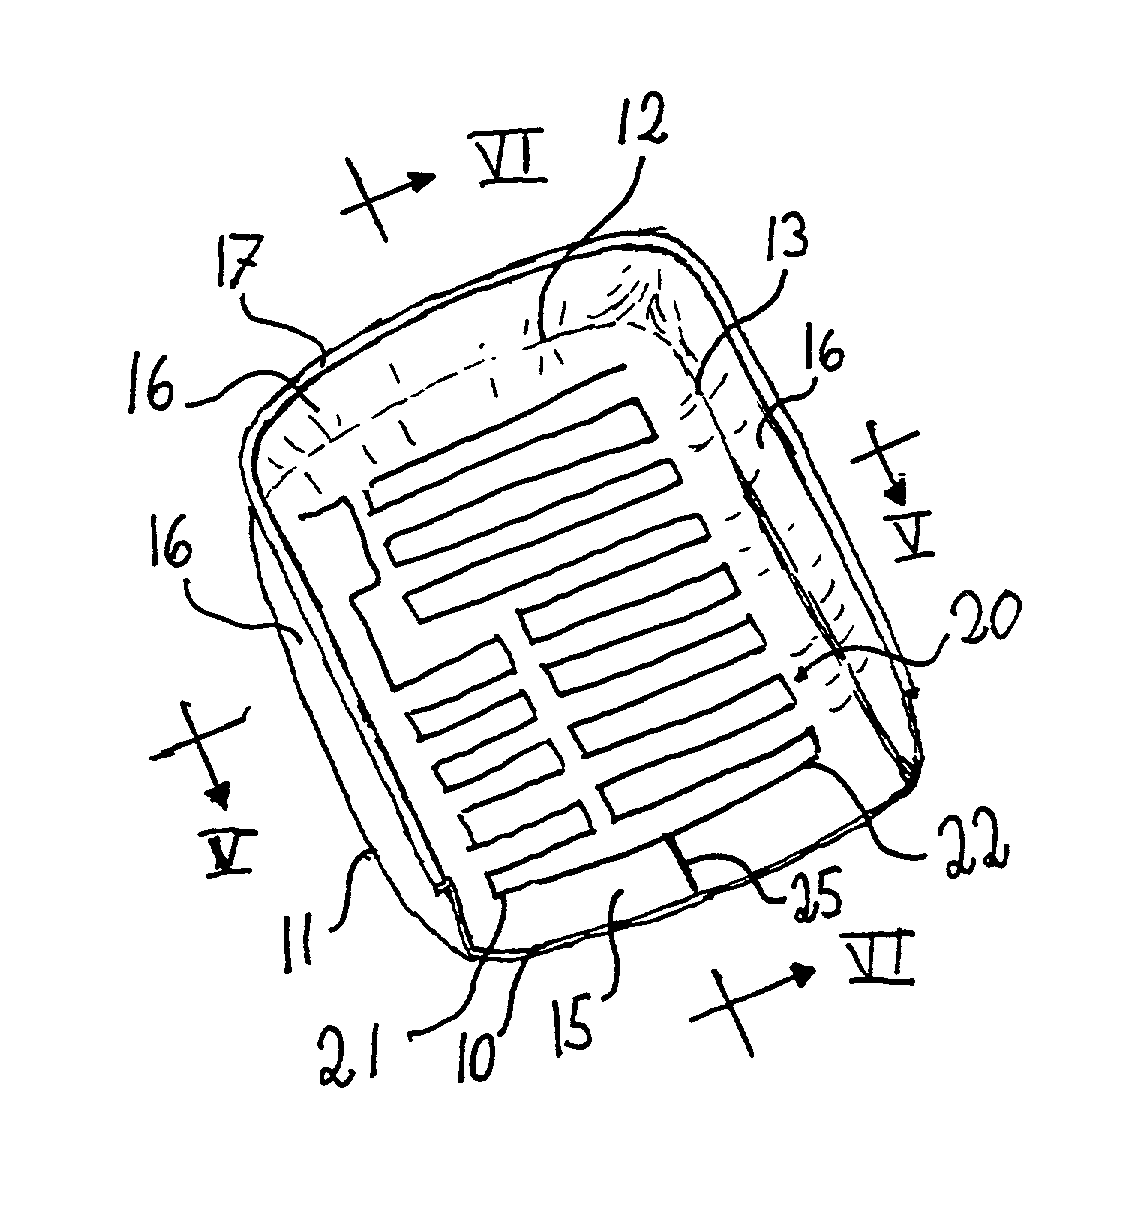 An antenna device, a method for manufacturing an antenna device and a radio communication device including an antenna device